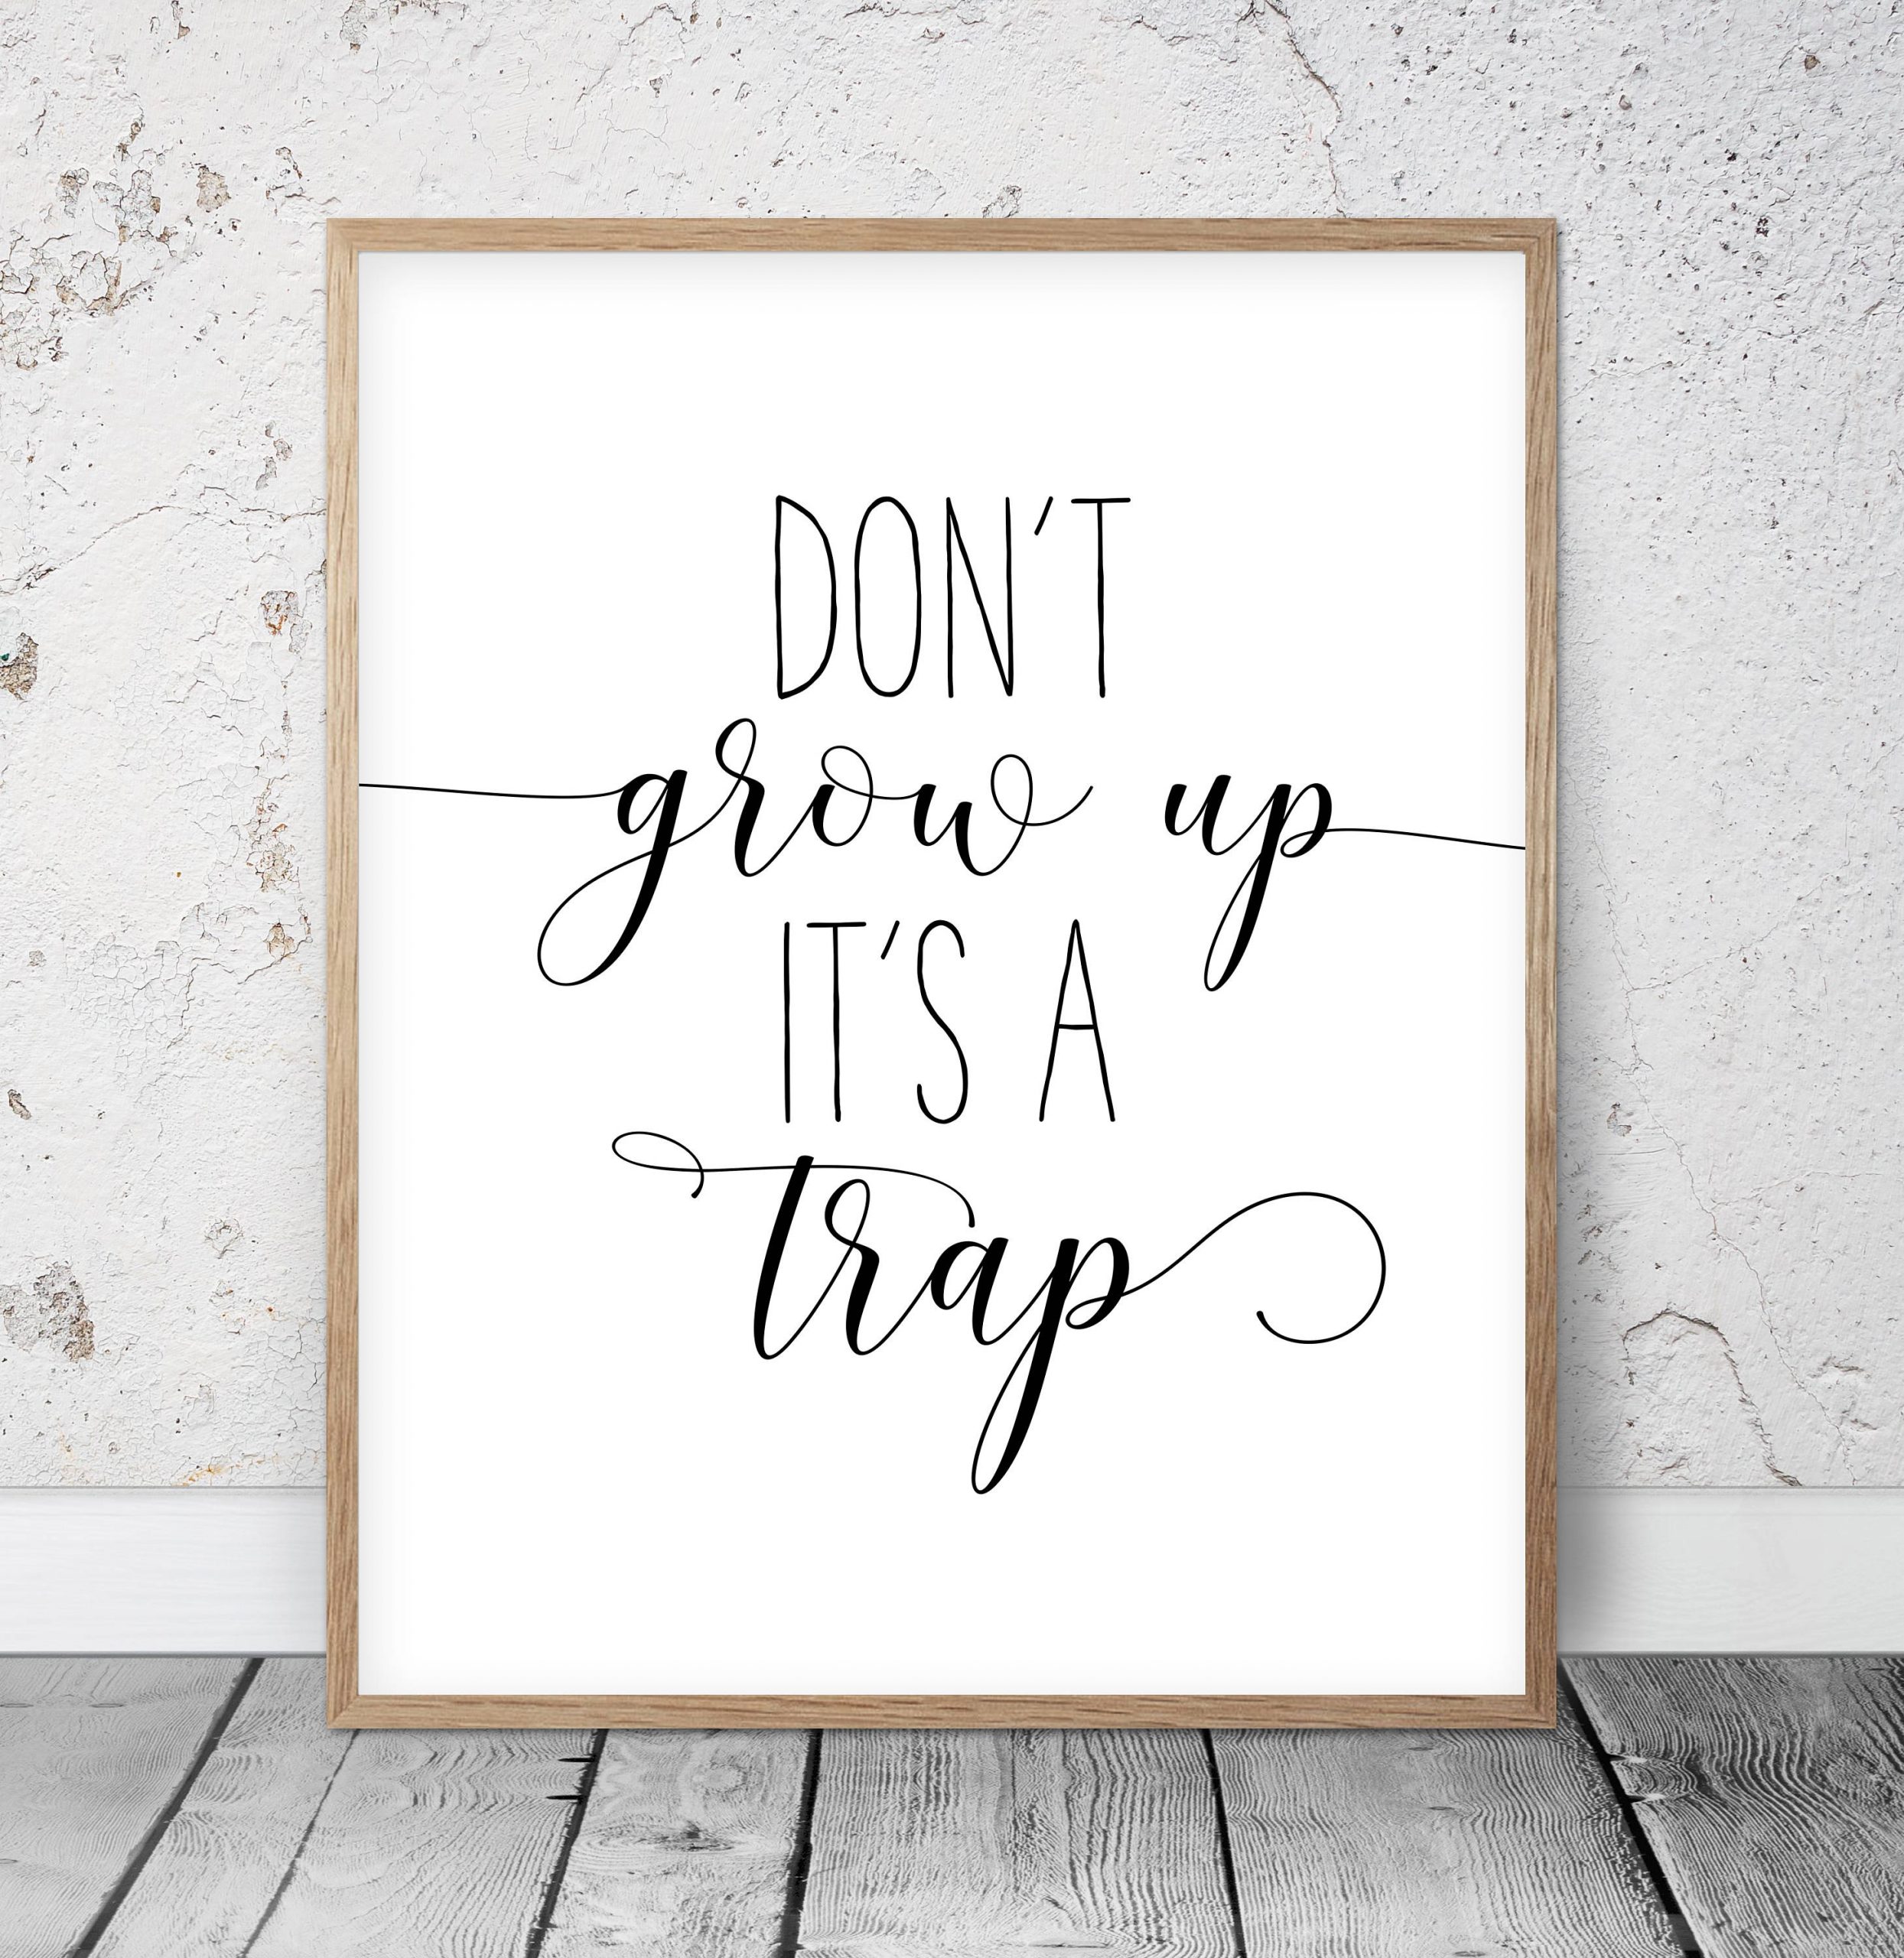 DON'T GROW UP IT'S A TRAP Wall PrintMotivational Wall Art Home Decor Ideas 